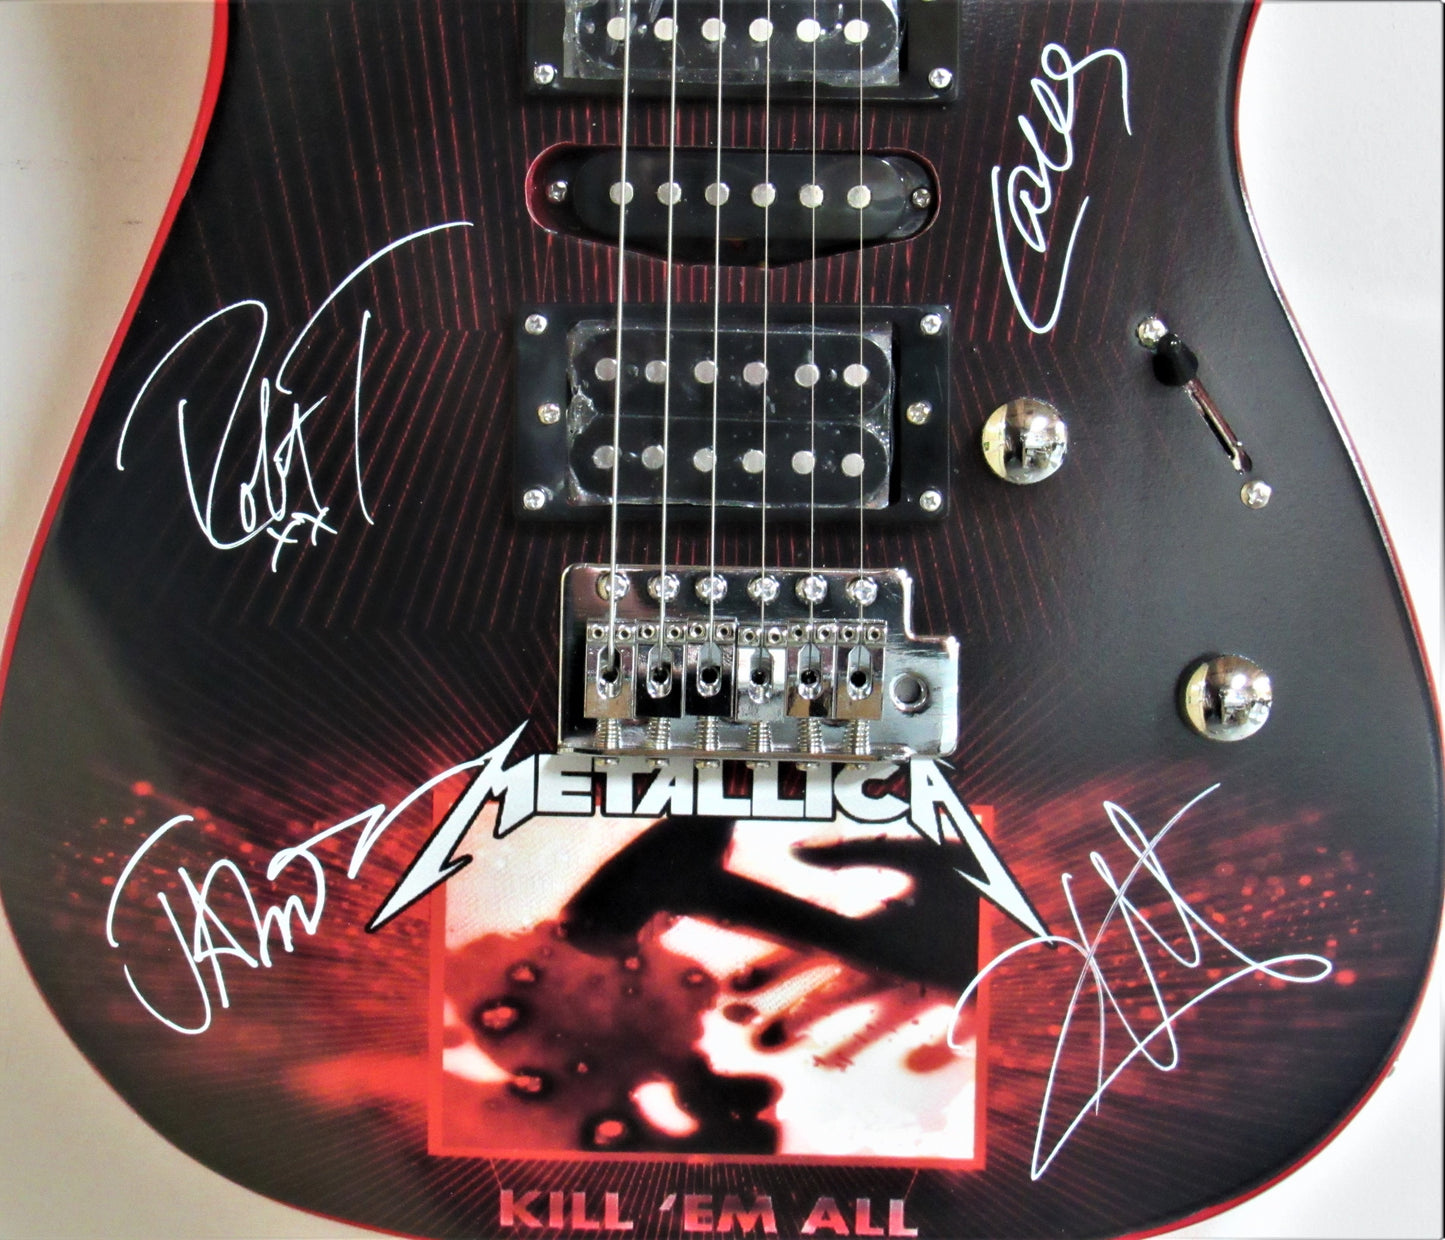 Metallica Signed Gibson Epiphone And Justice For All Cd Album Graphics  Guitar